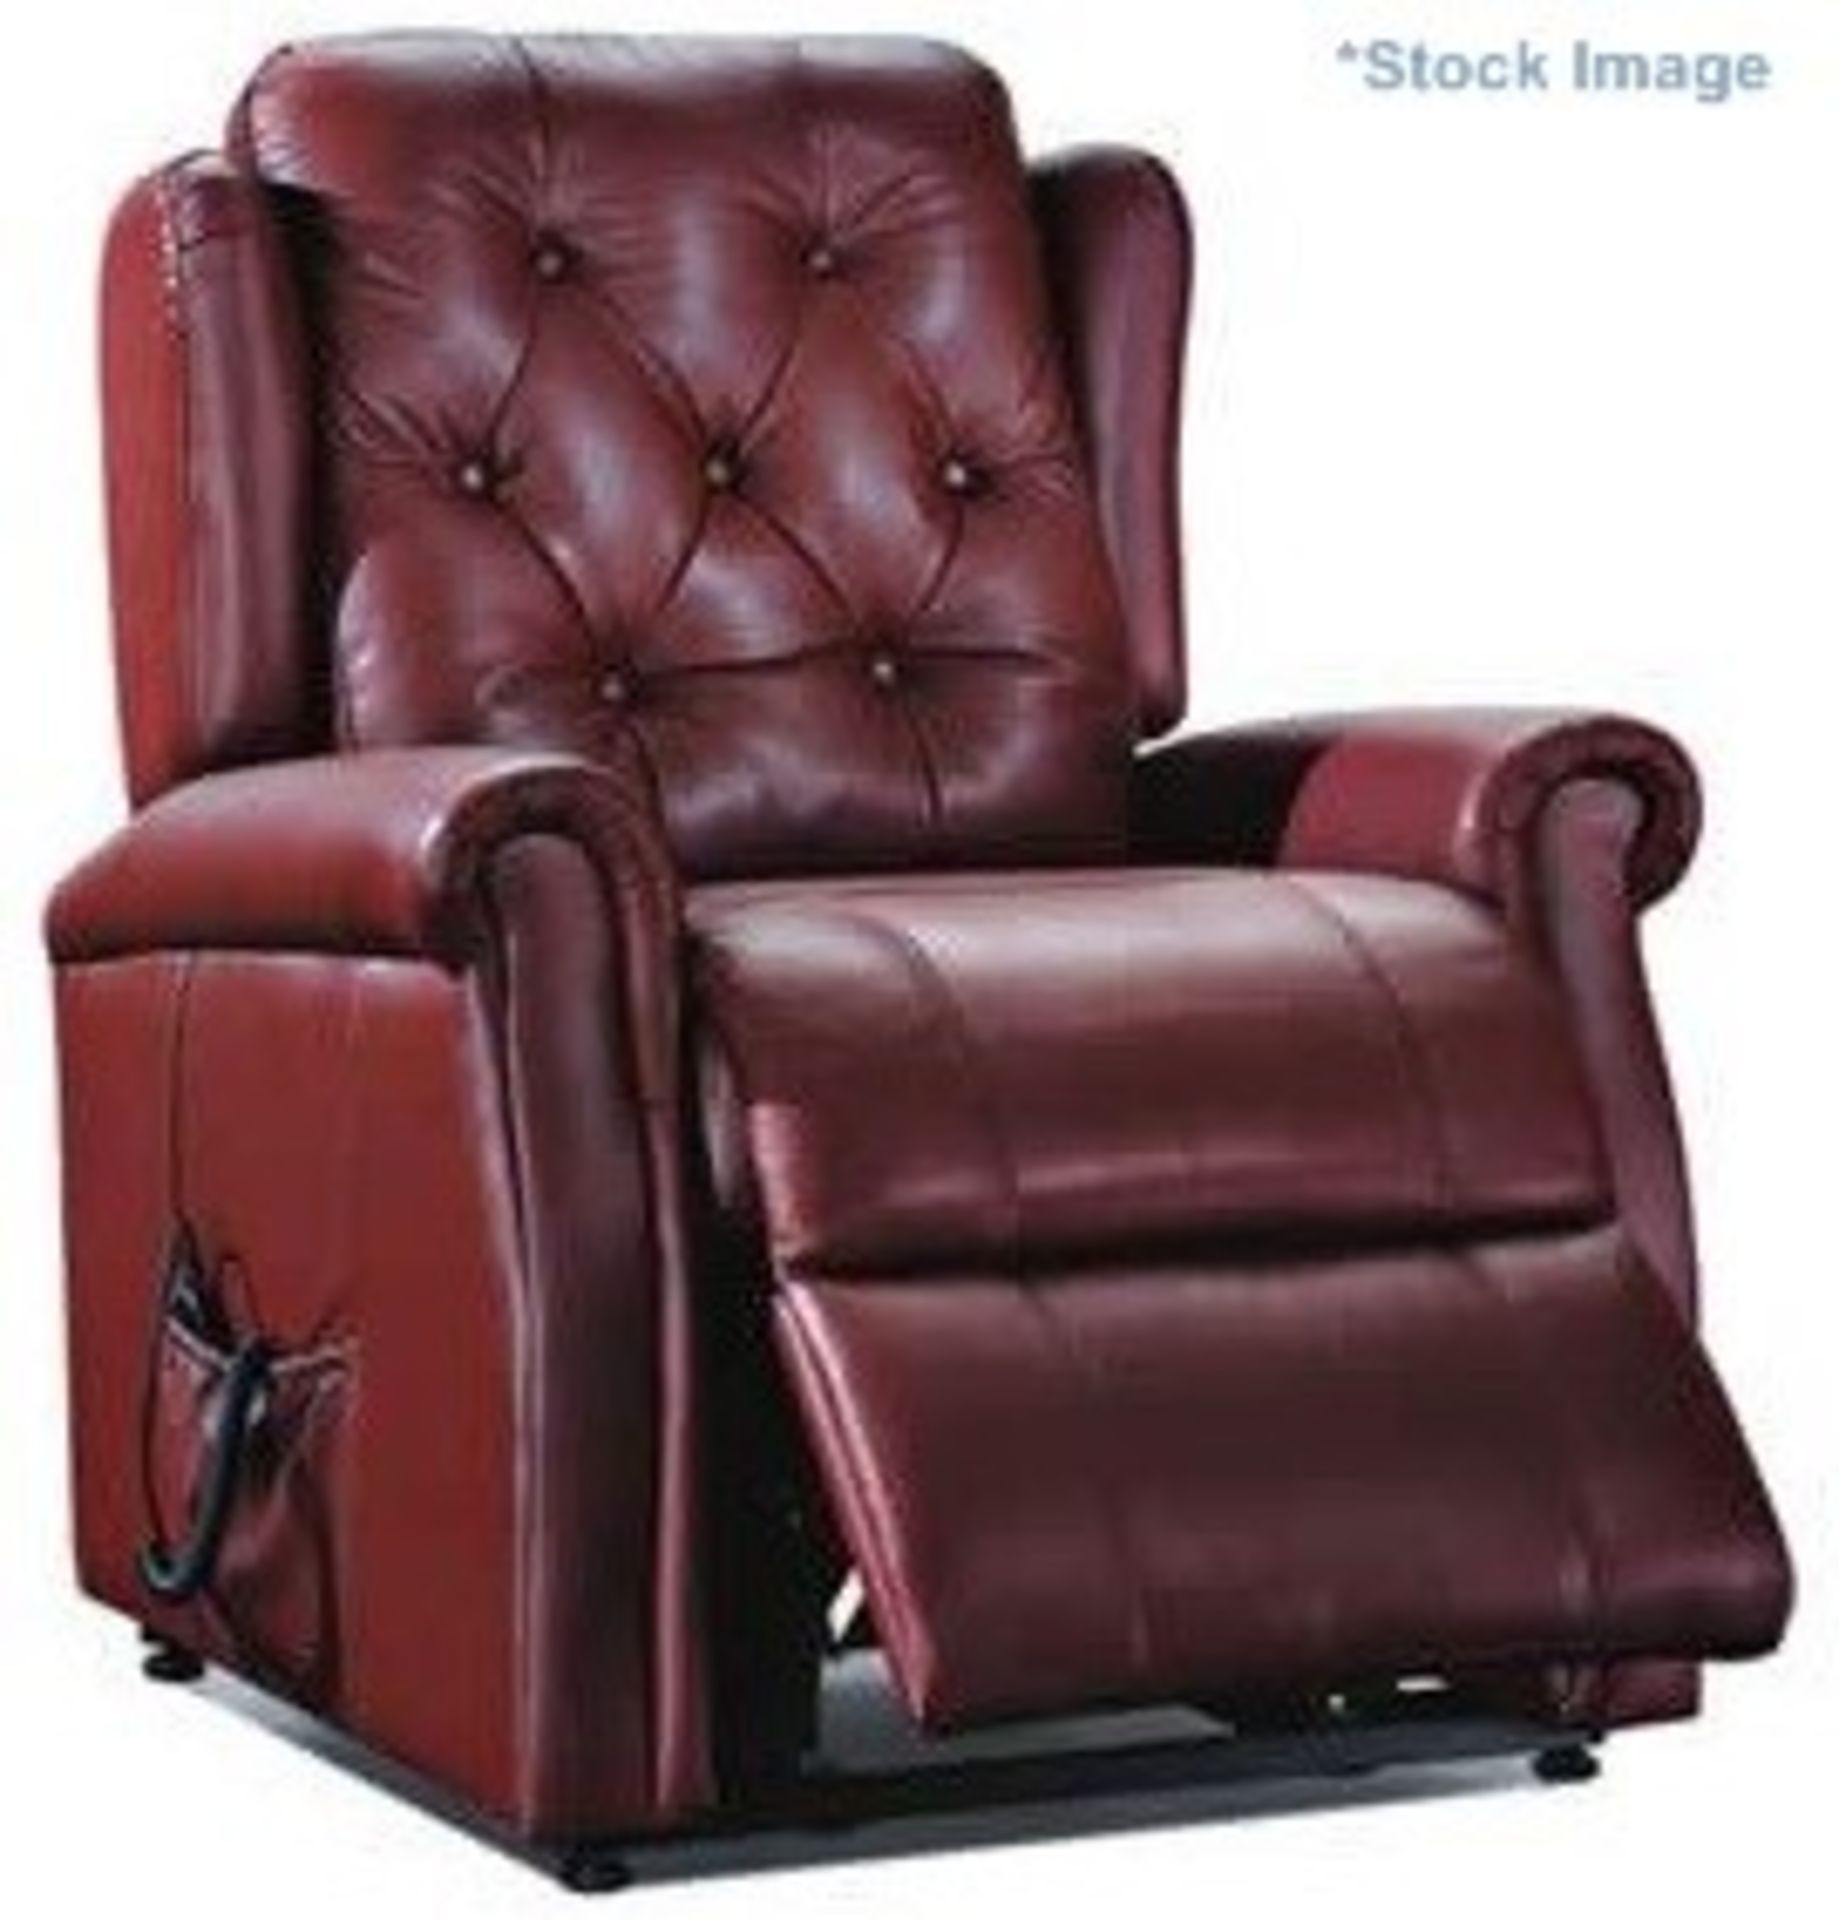 1 x "Beatrice" Riser Recliner Chair By TCS - Upholstered In Genuine Italian Leather (Red) - Pocket - Image 8 of 9